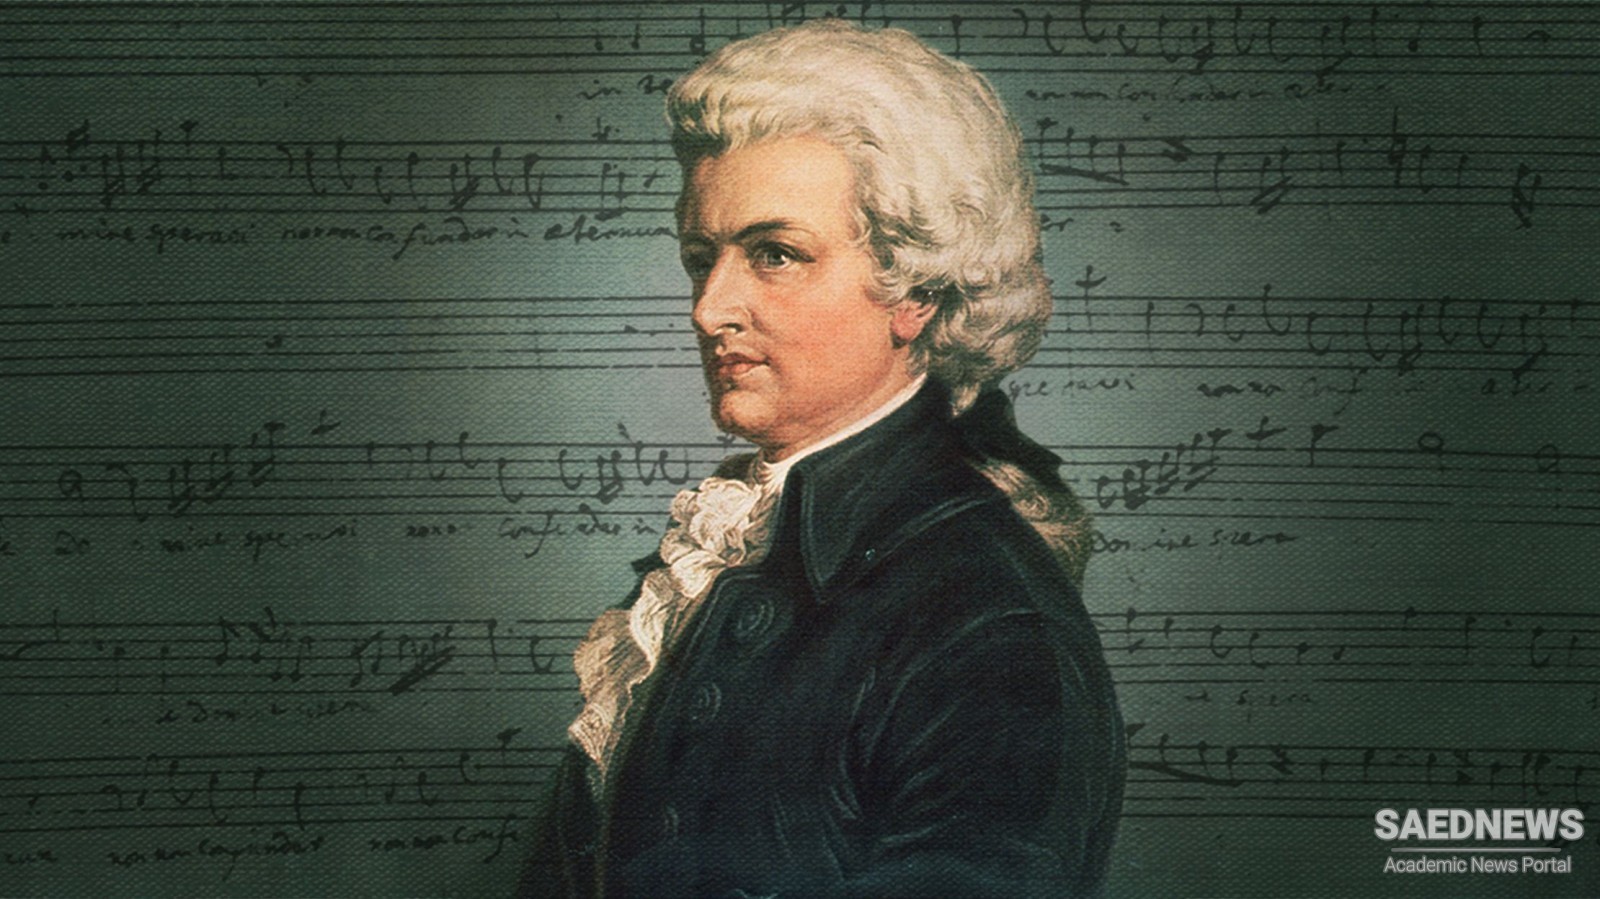 Wolfgang Amadeus Mozart: the Apex of Viennese Classic School